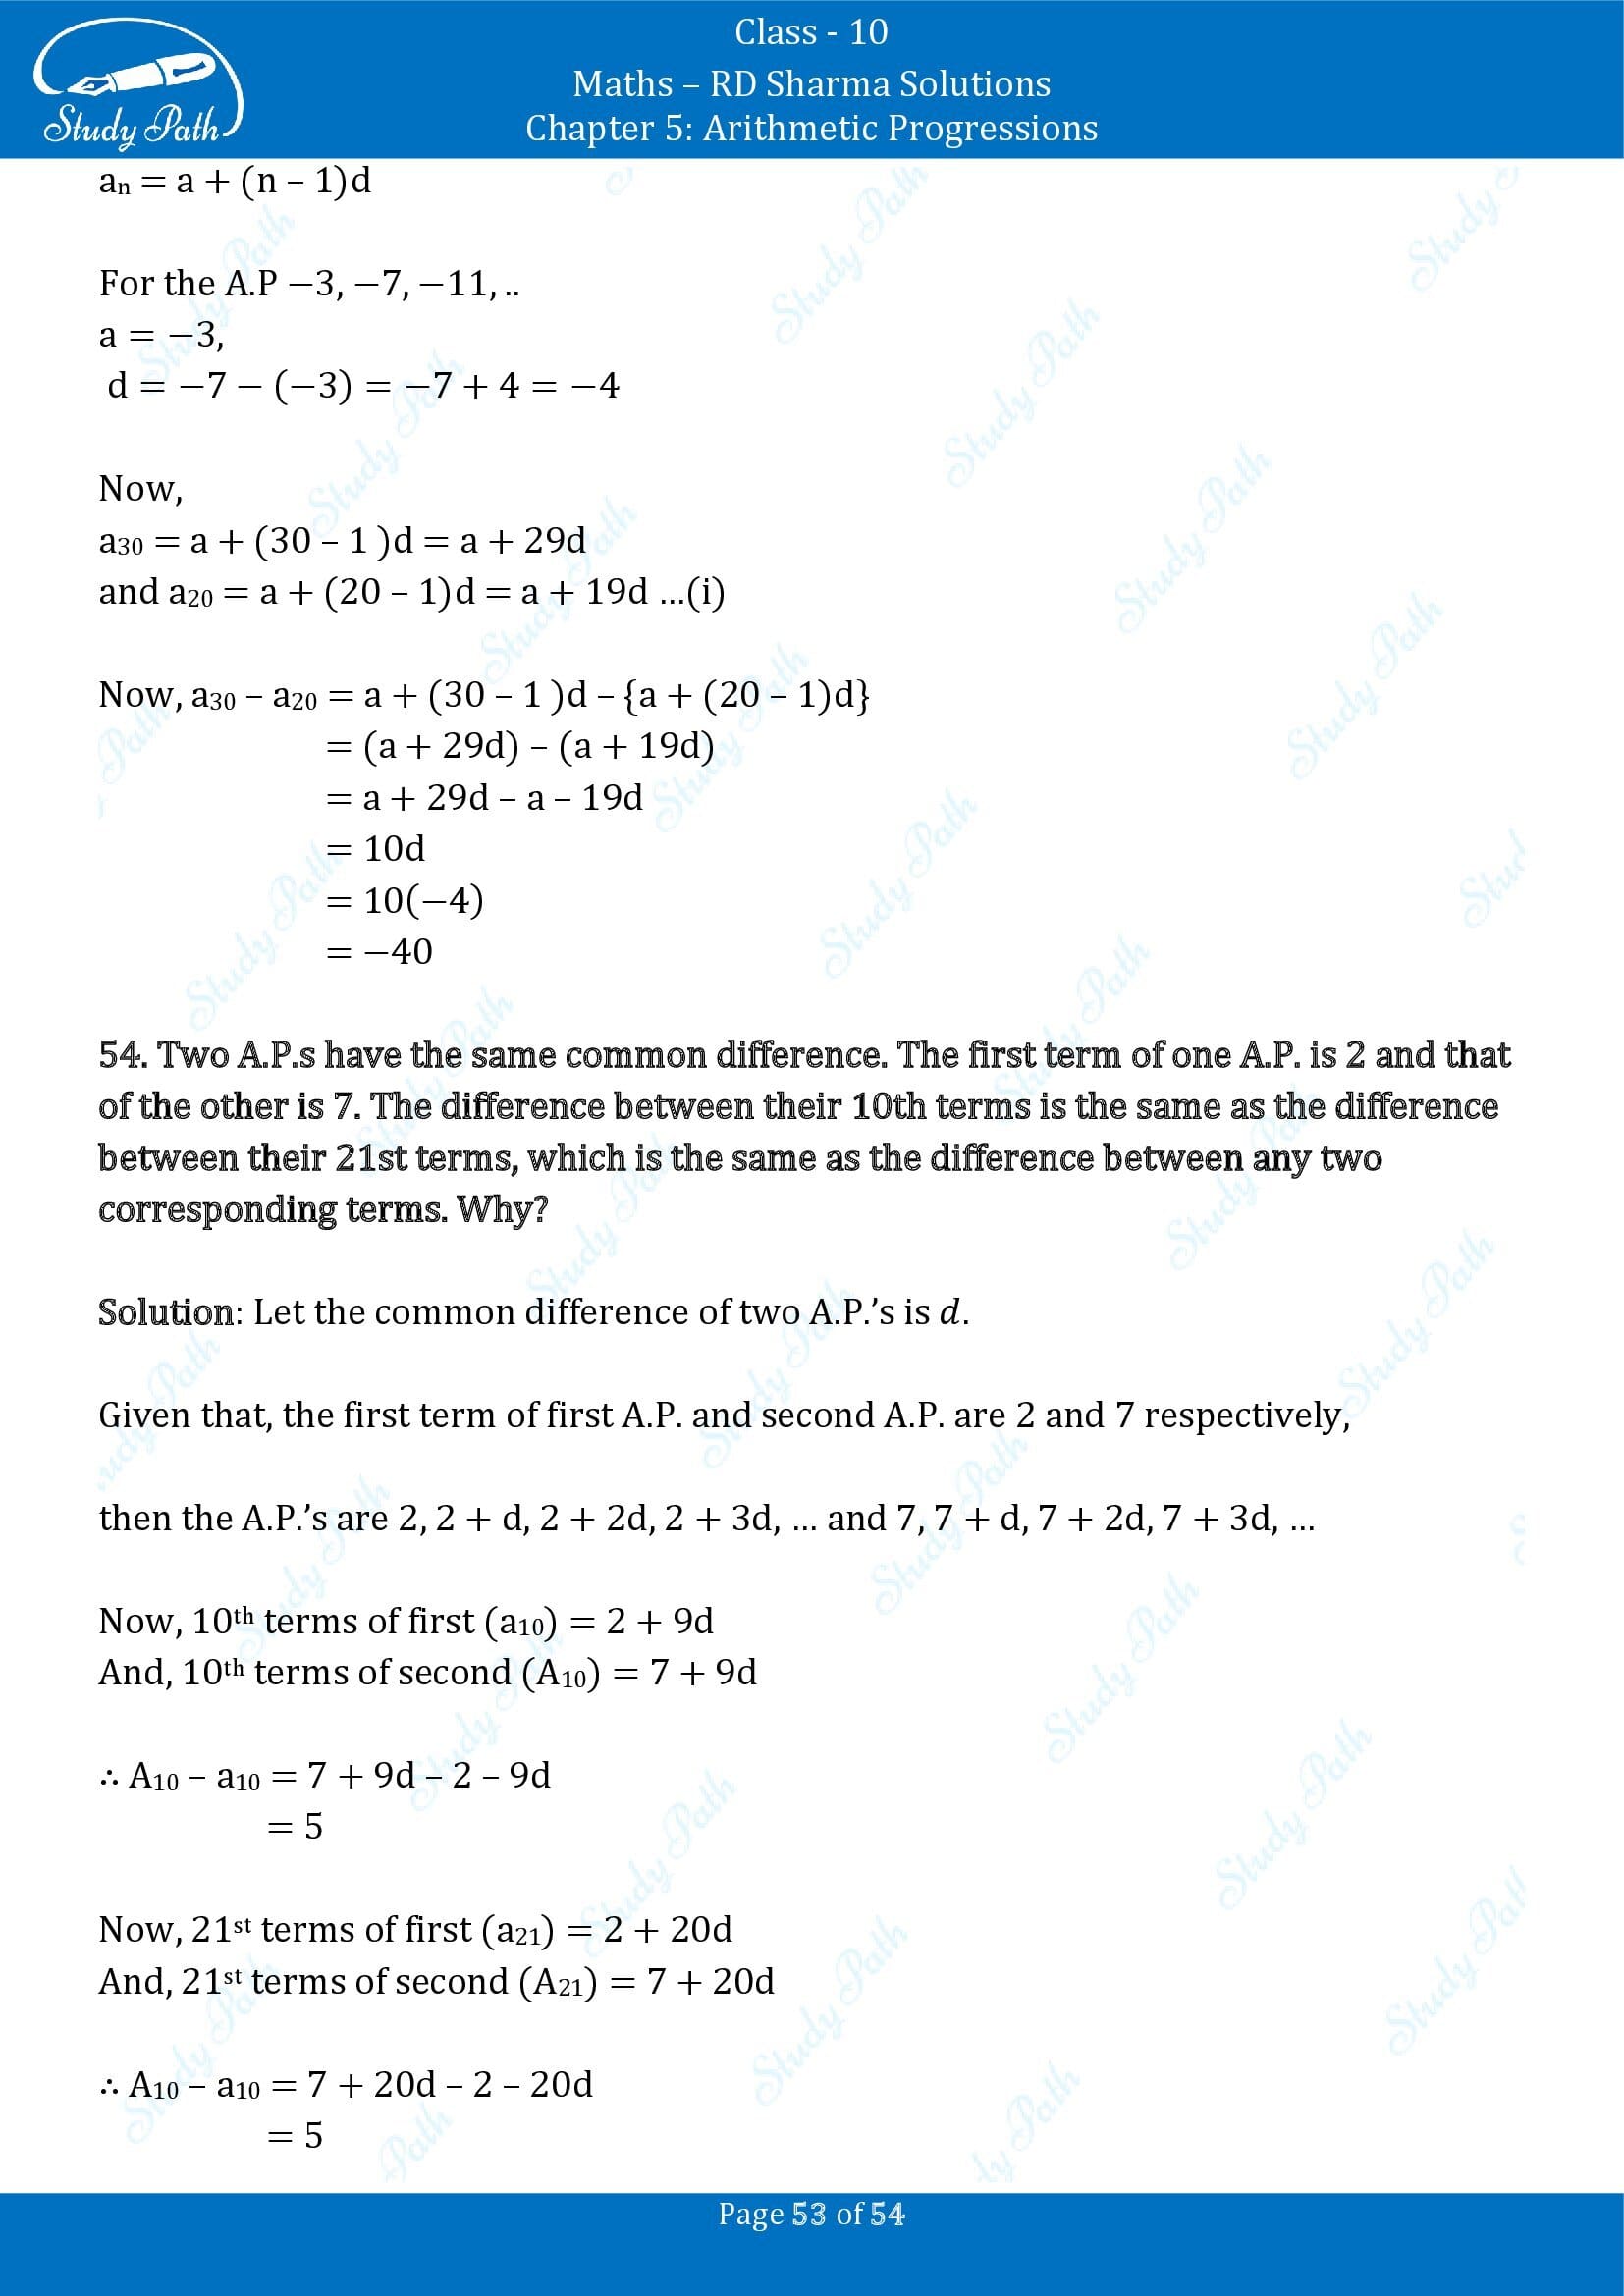 RD Sharma Solutions Class 10 Chapter 5 Arithmetic Progressions Exercise 5.4 00053